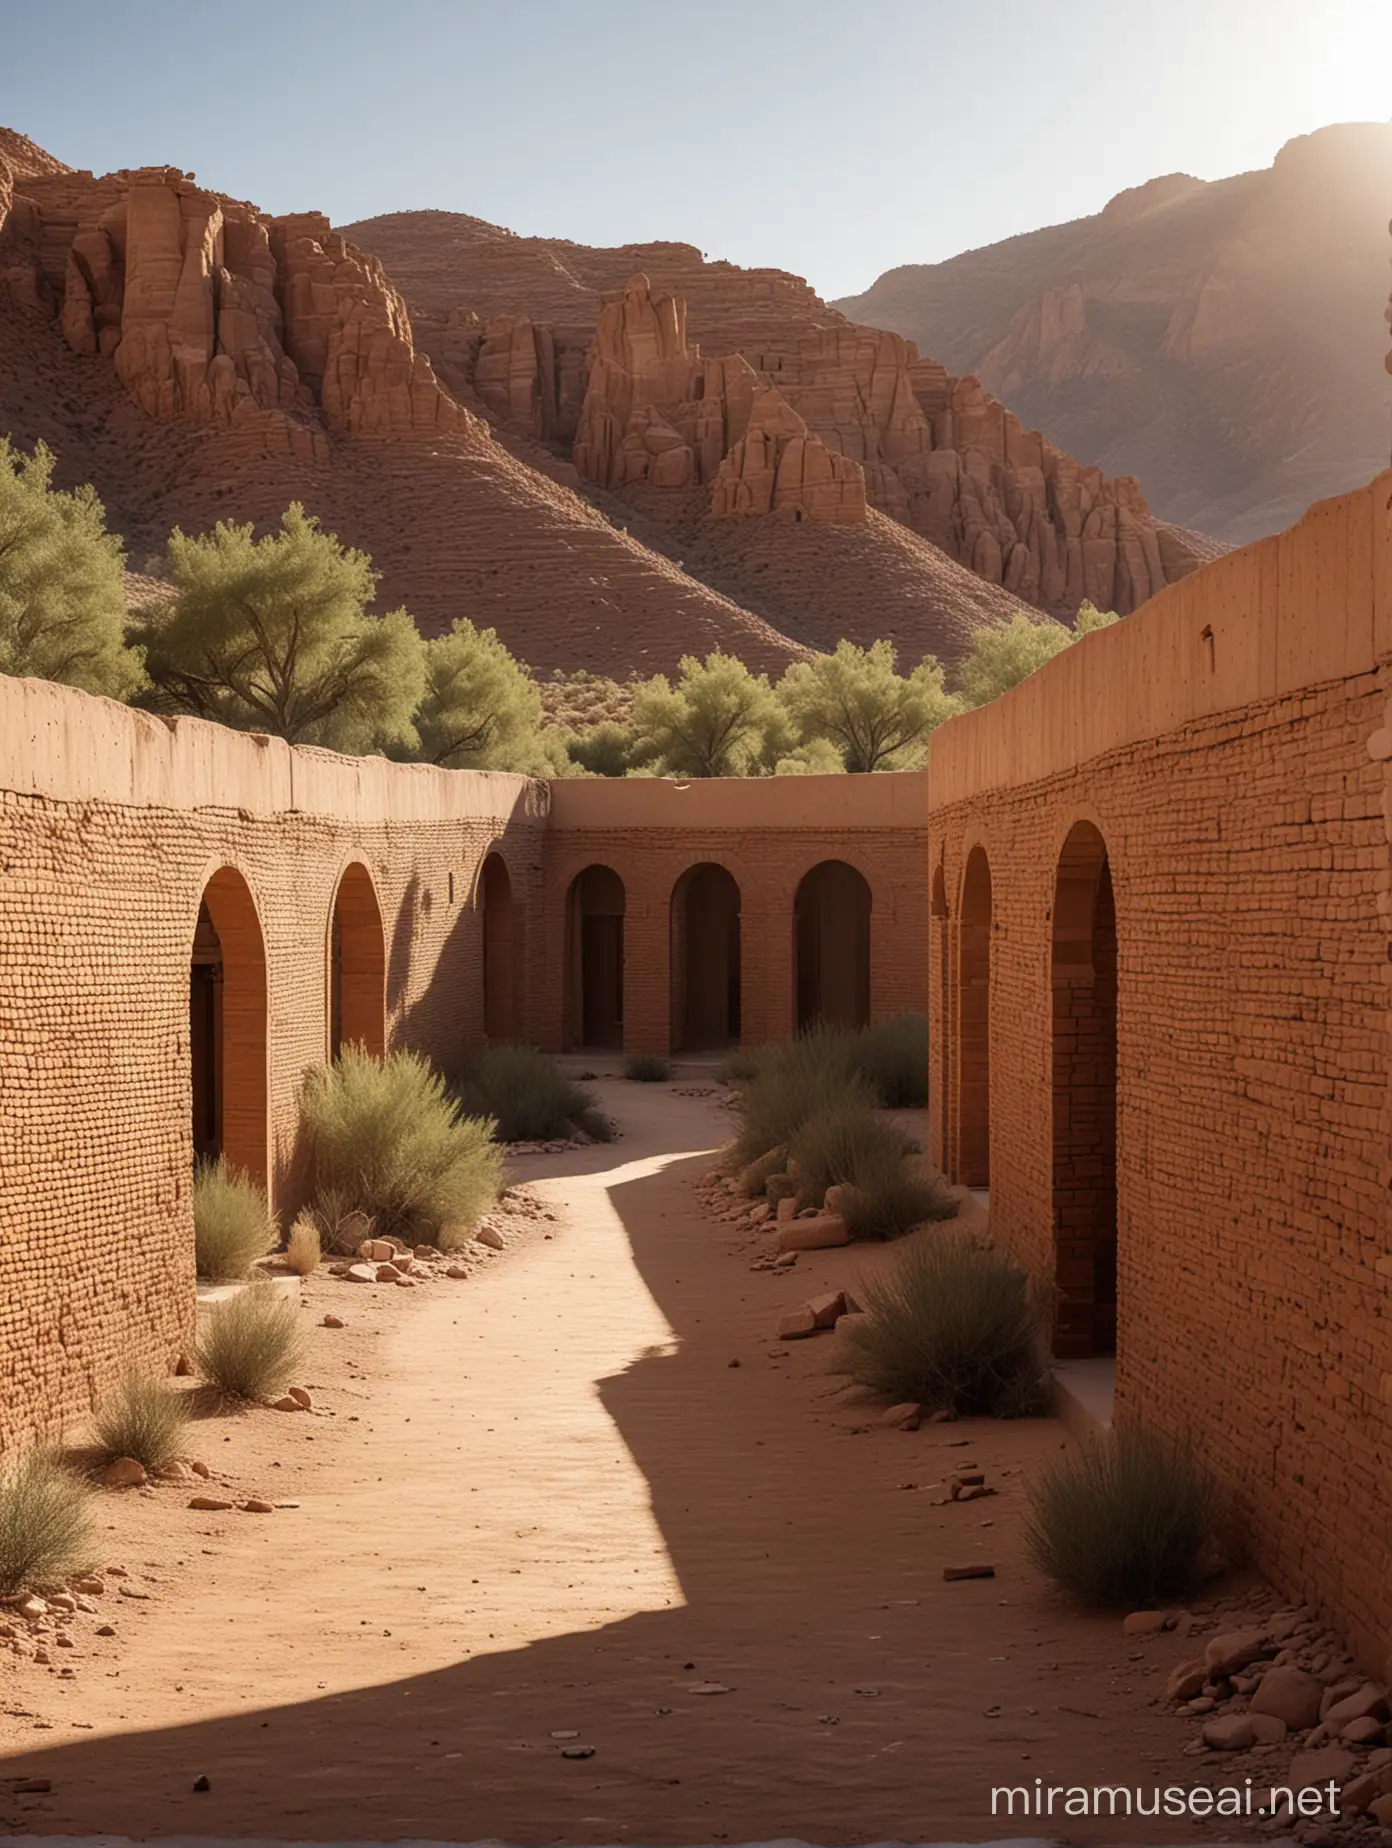 Desert Courtyard Cityscape Countless Cylindrical Buildings Amidst a Sunny Oasis